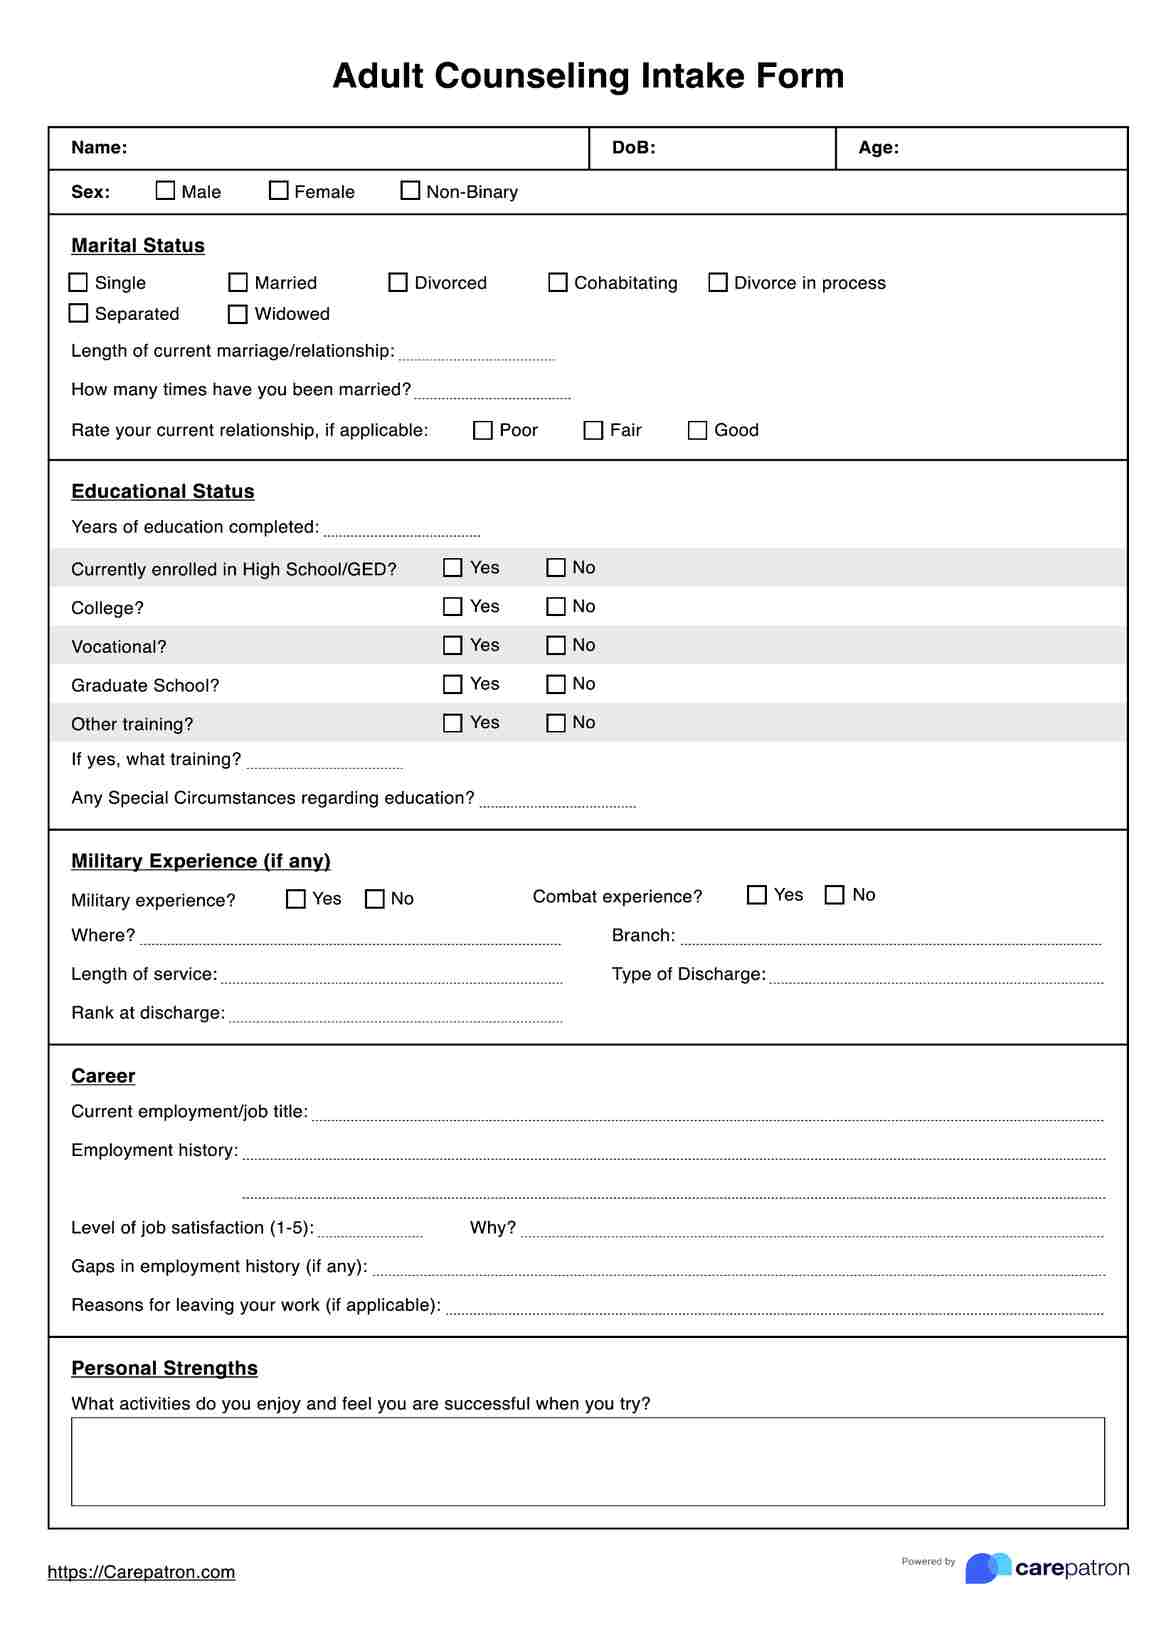 Adult Counseling Intake Form PDF Example